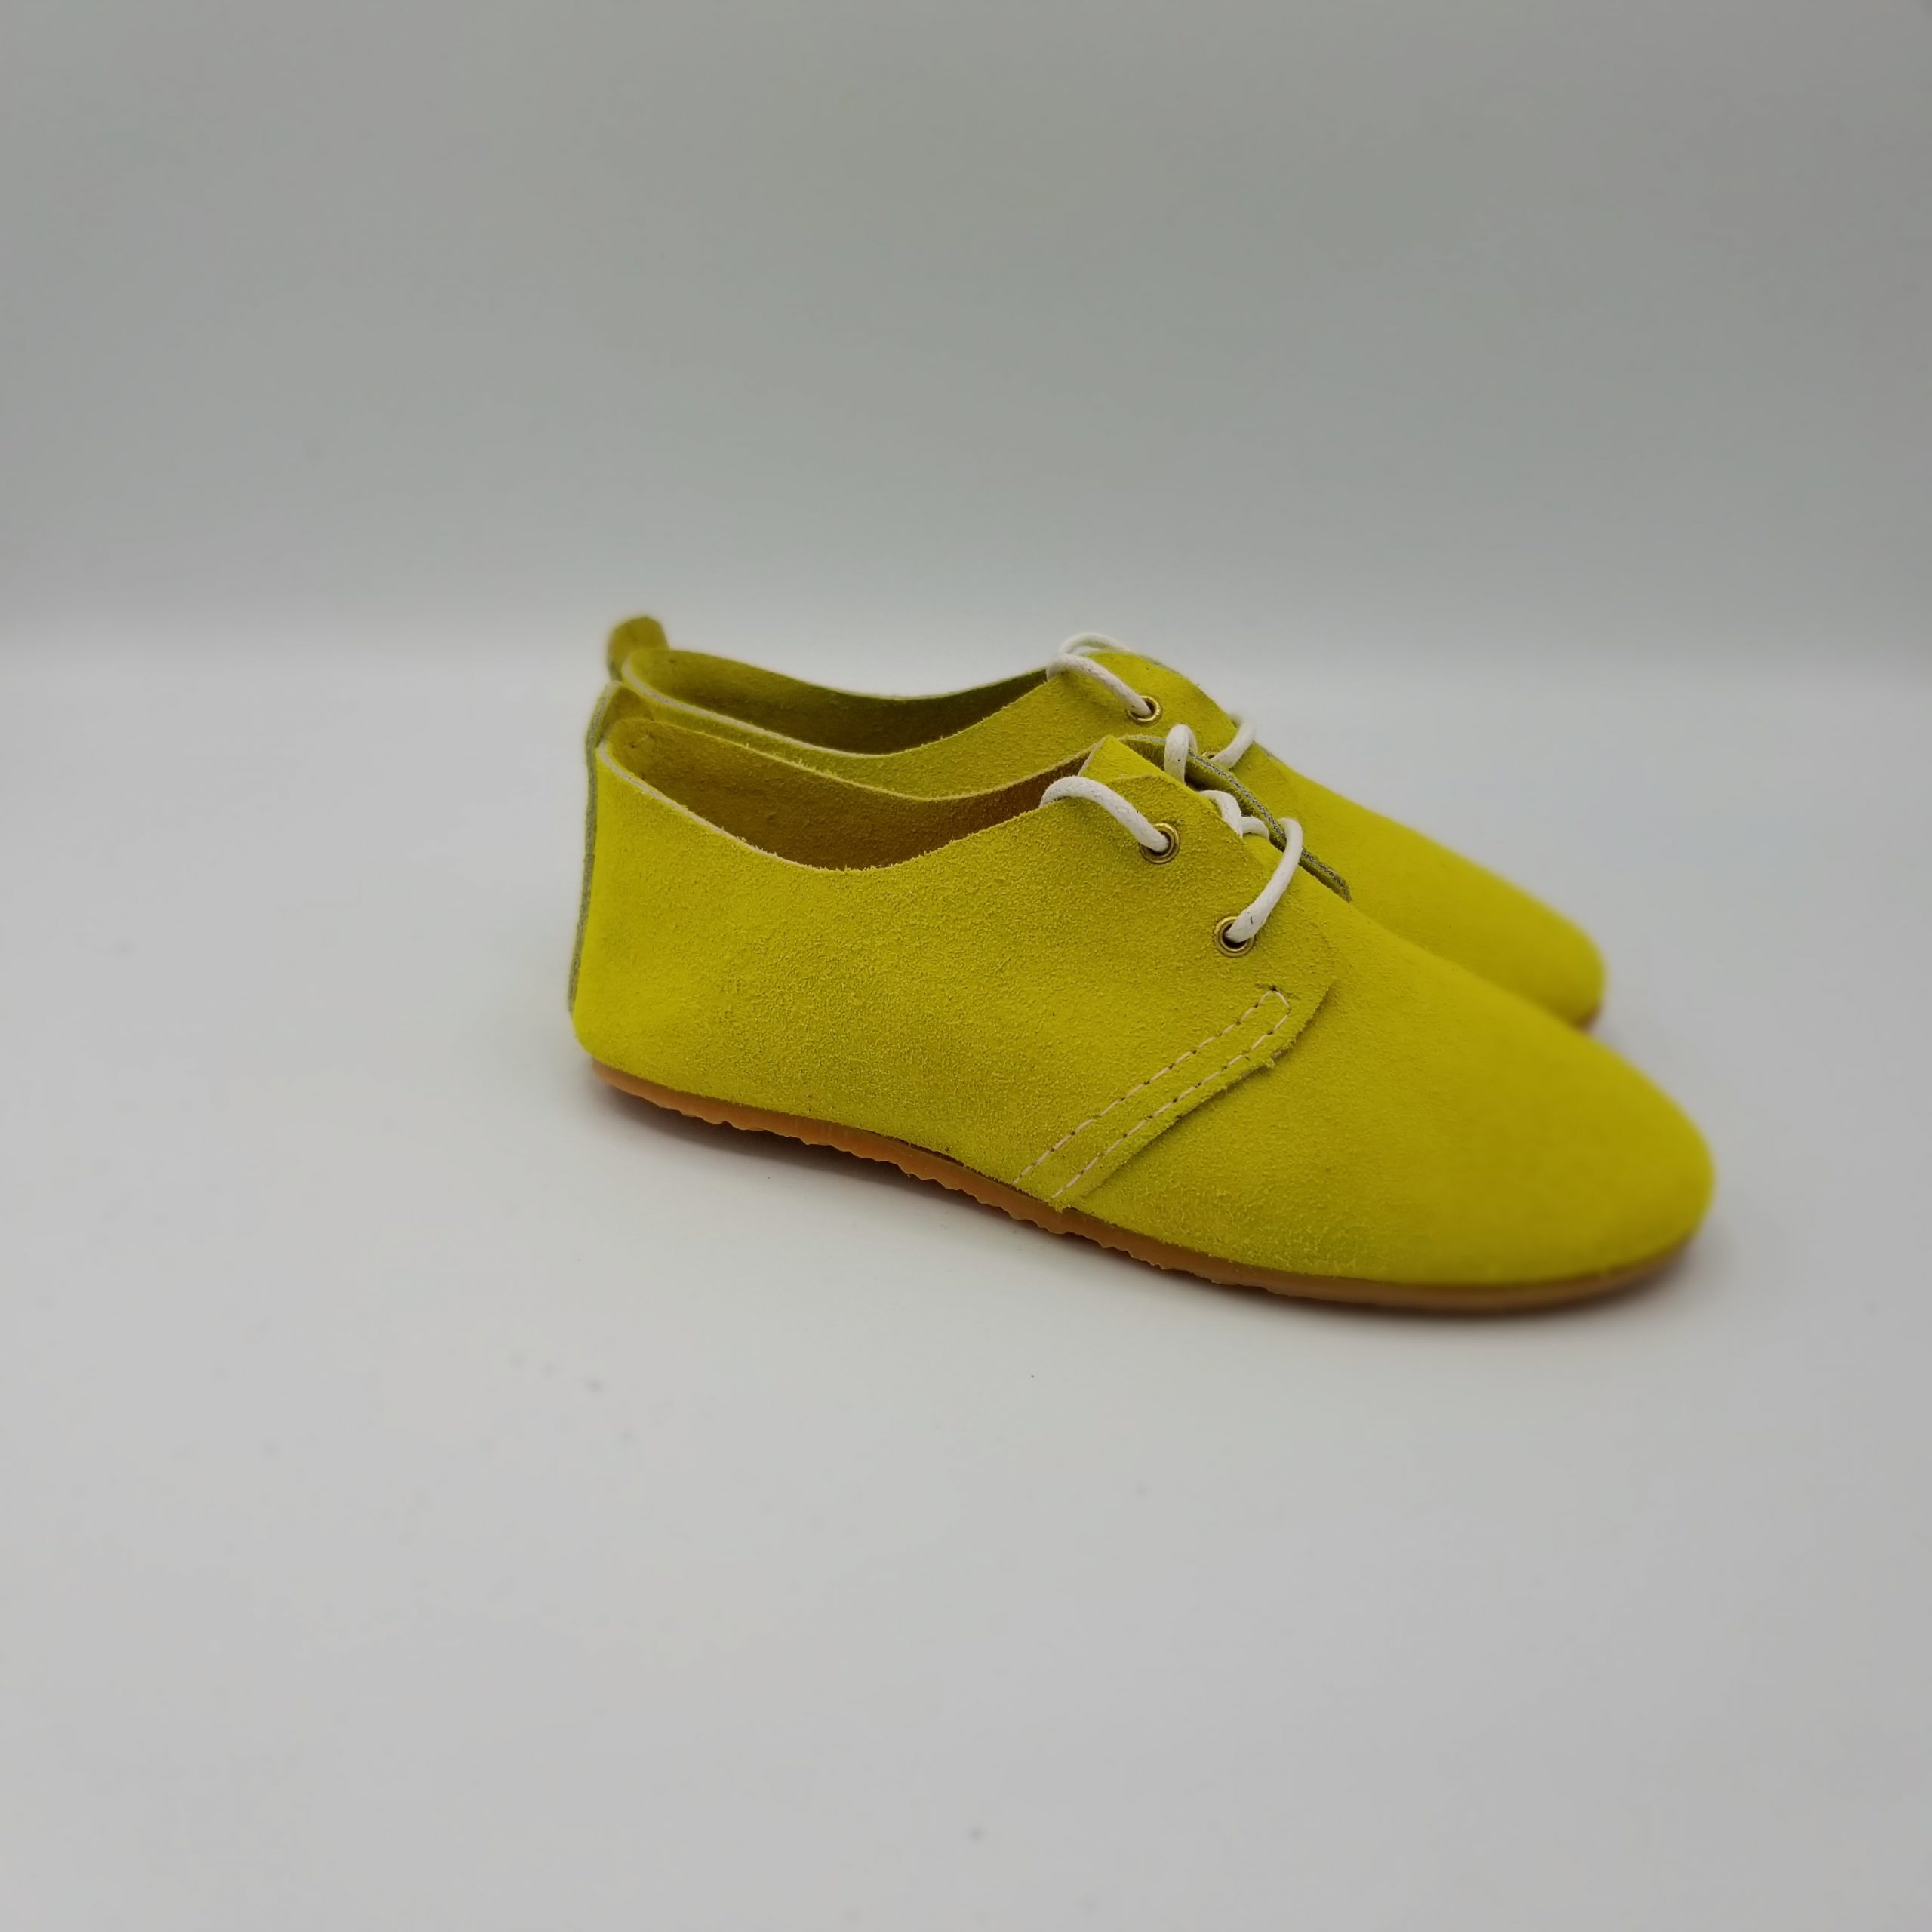 A pair of yellow shoes